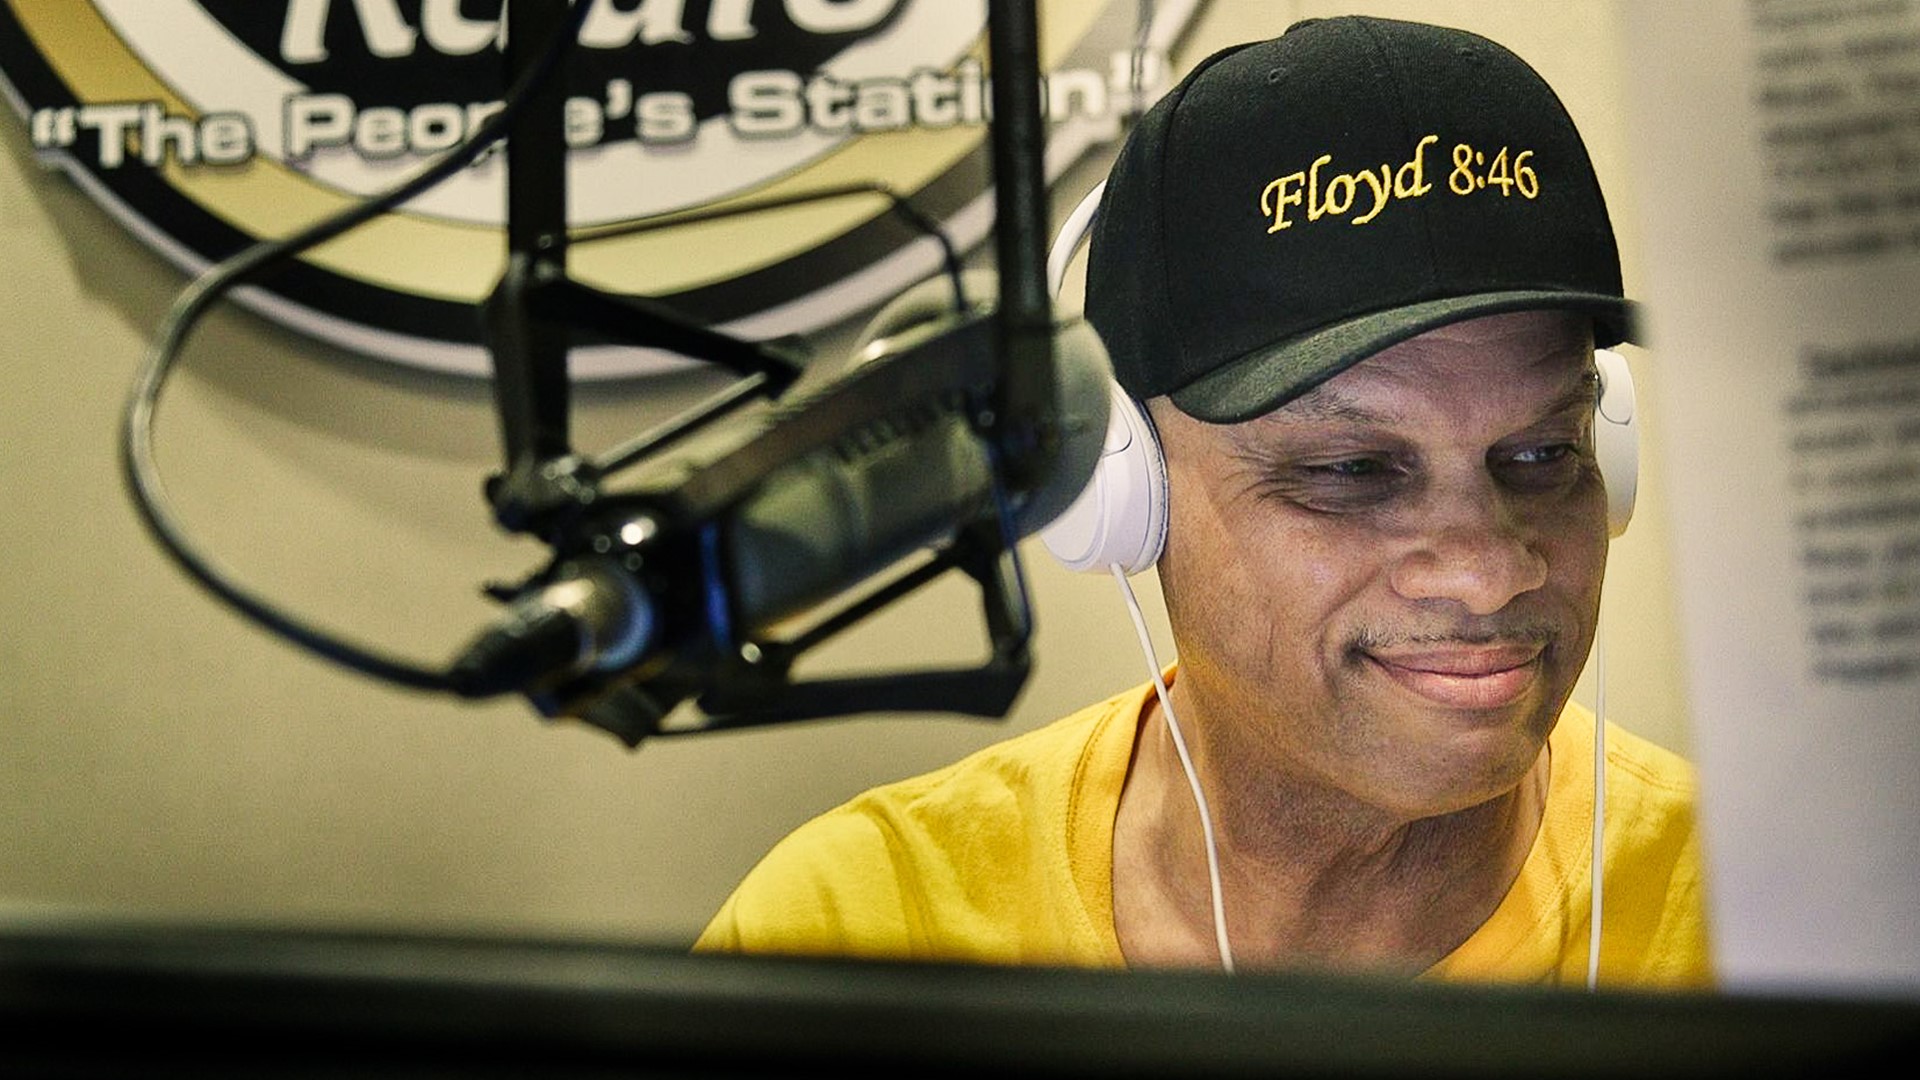 KMOJ's Ray Richardson said he's stepping away from the airwaves to begin a new chapter in his life. Ray said he's moving to L.A. to be closer to his mother.